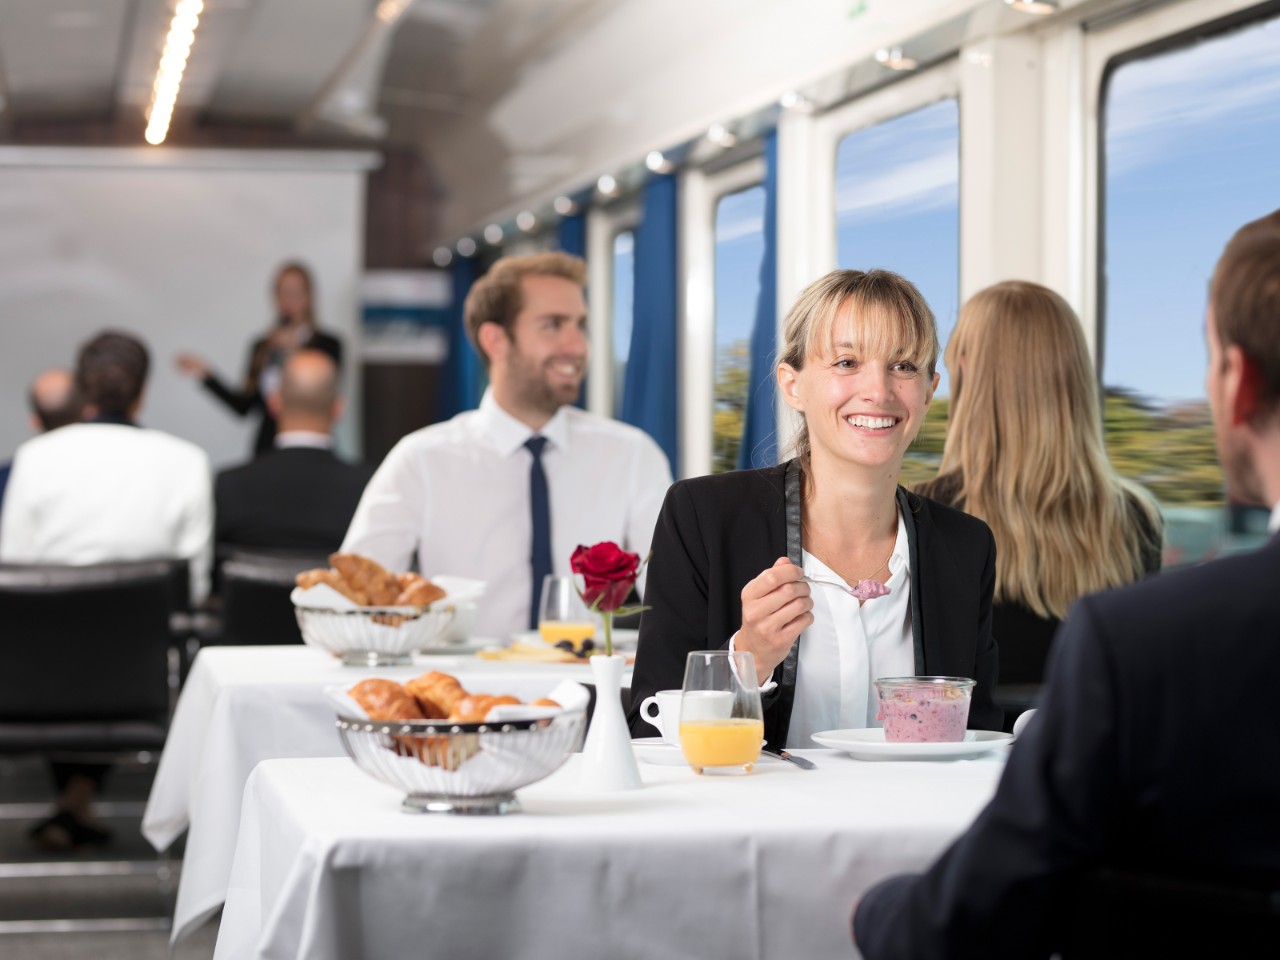 Journey in Le Salon de Luxe saloon coach with catering.